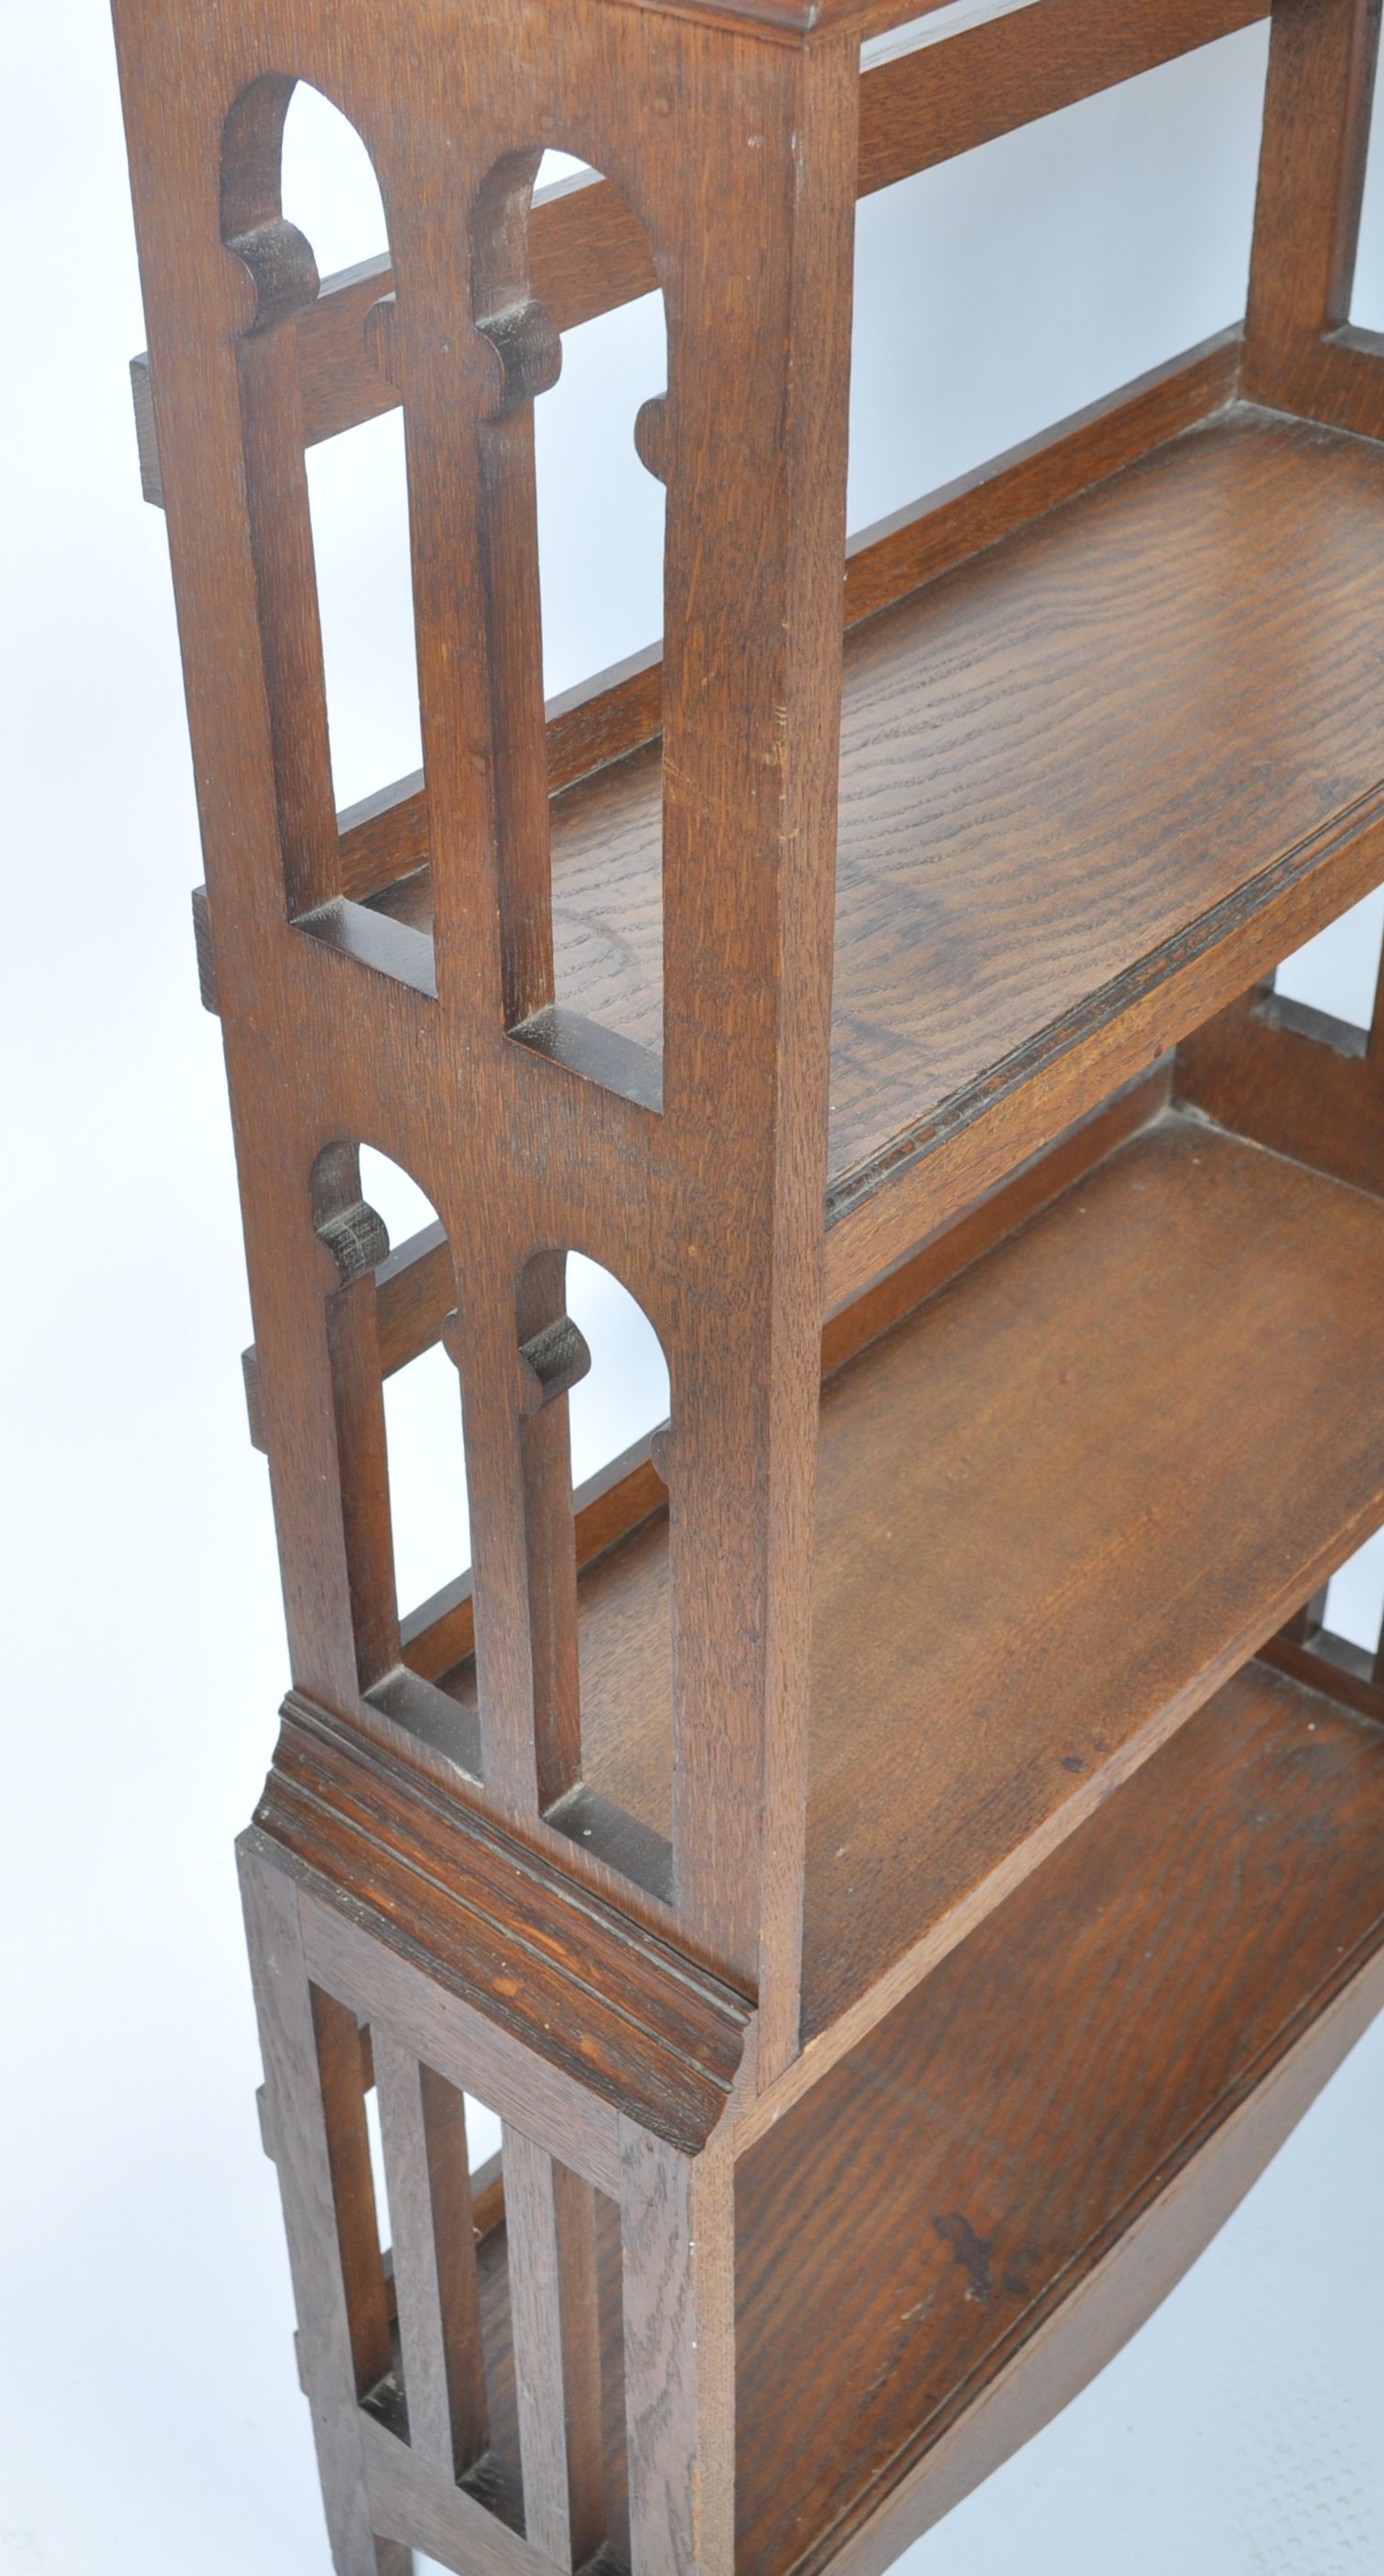 PAIR OF EARLY 20TH CENTURY LIBERTY MANNER BOOKCASES - Image 8 of 8